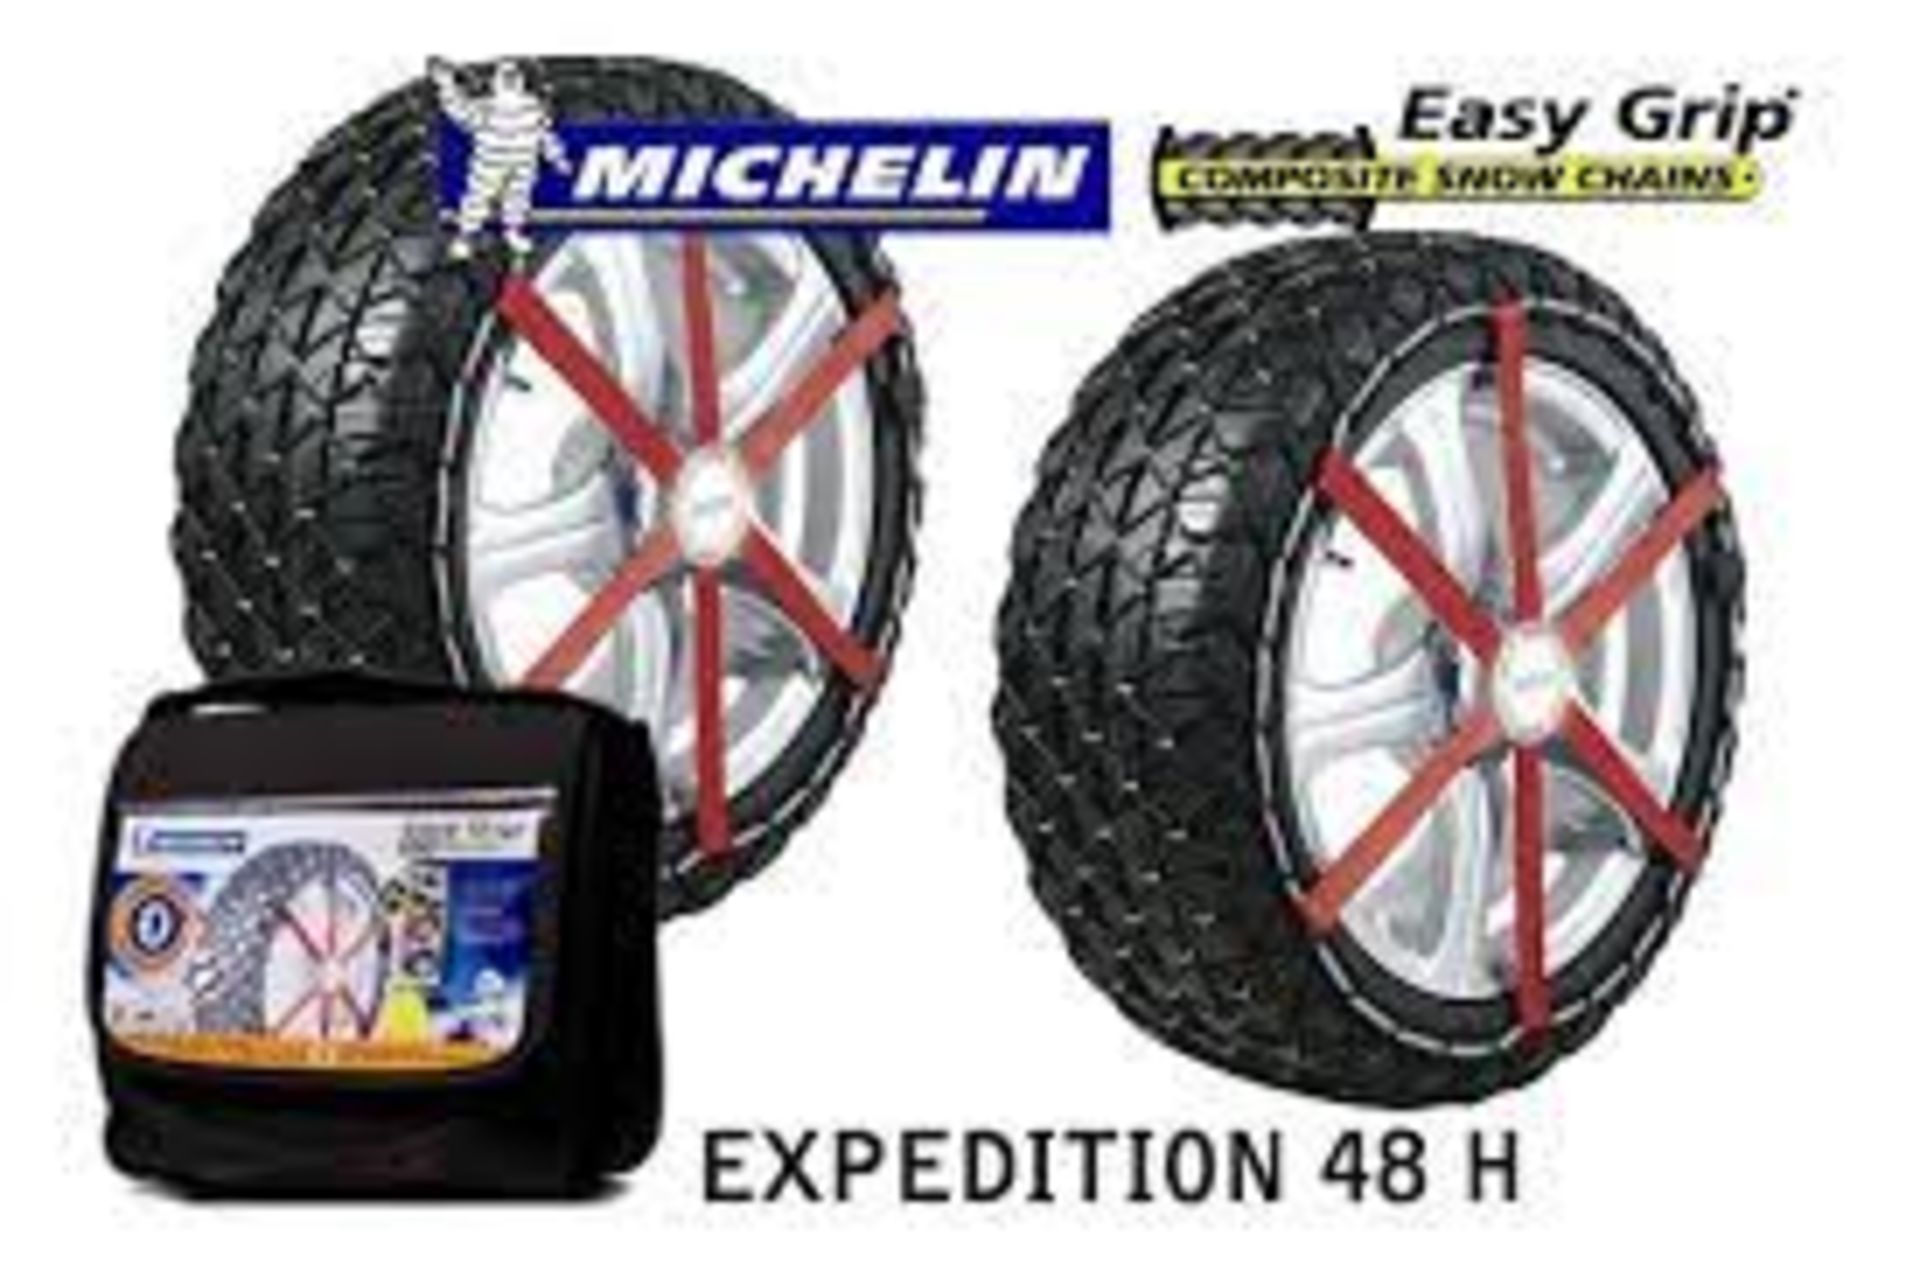 NEW PACKAGED SET OF Michelin Snow Sock Easy Grip 4X4 X13. RRP £92.95. The Michelin Easy Grip 4X4 - Image 3 of 3